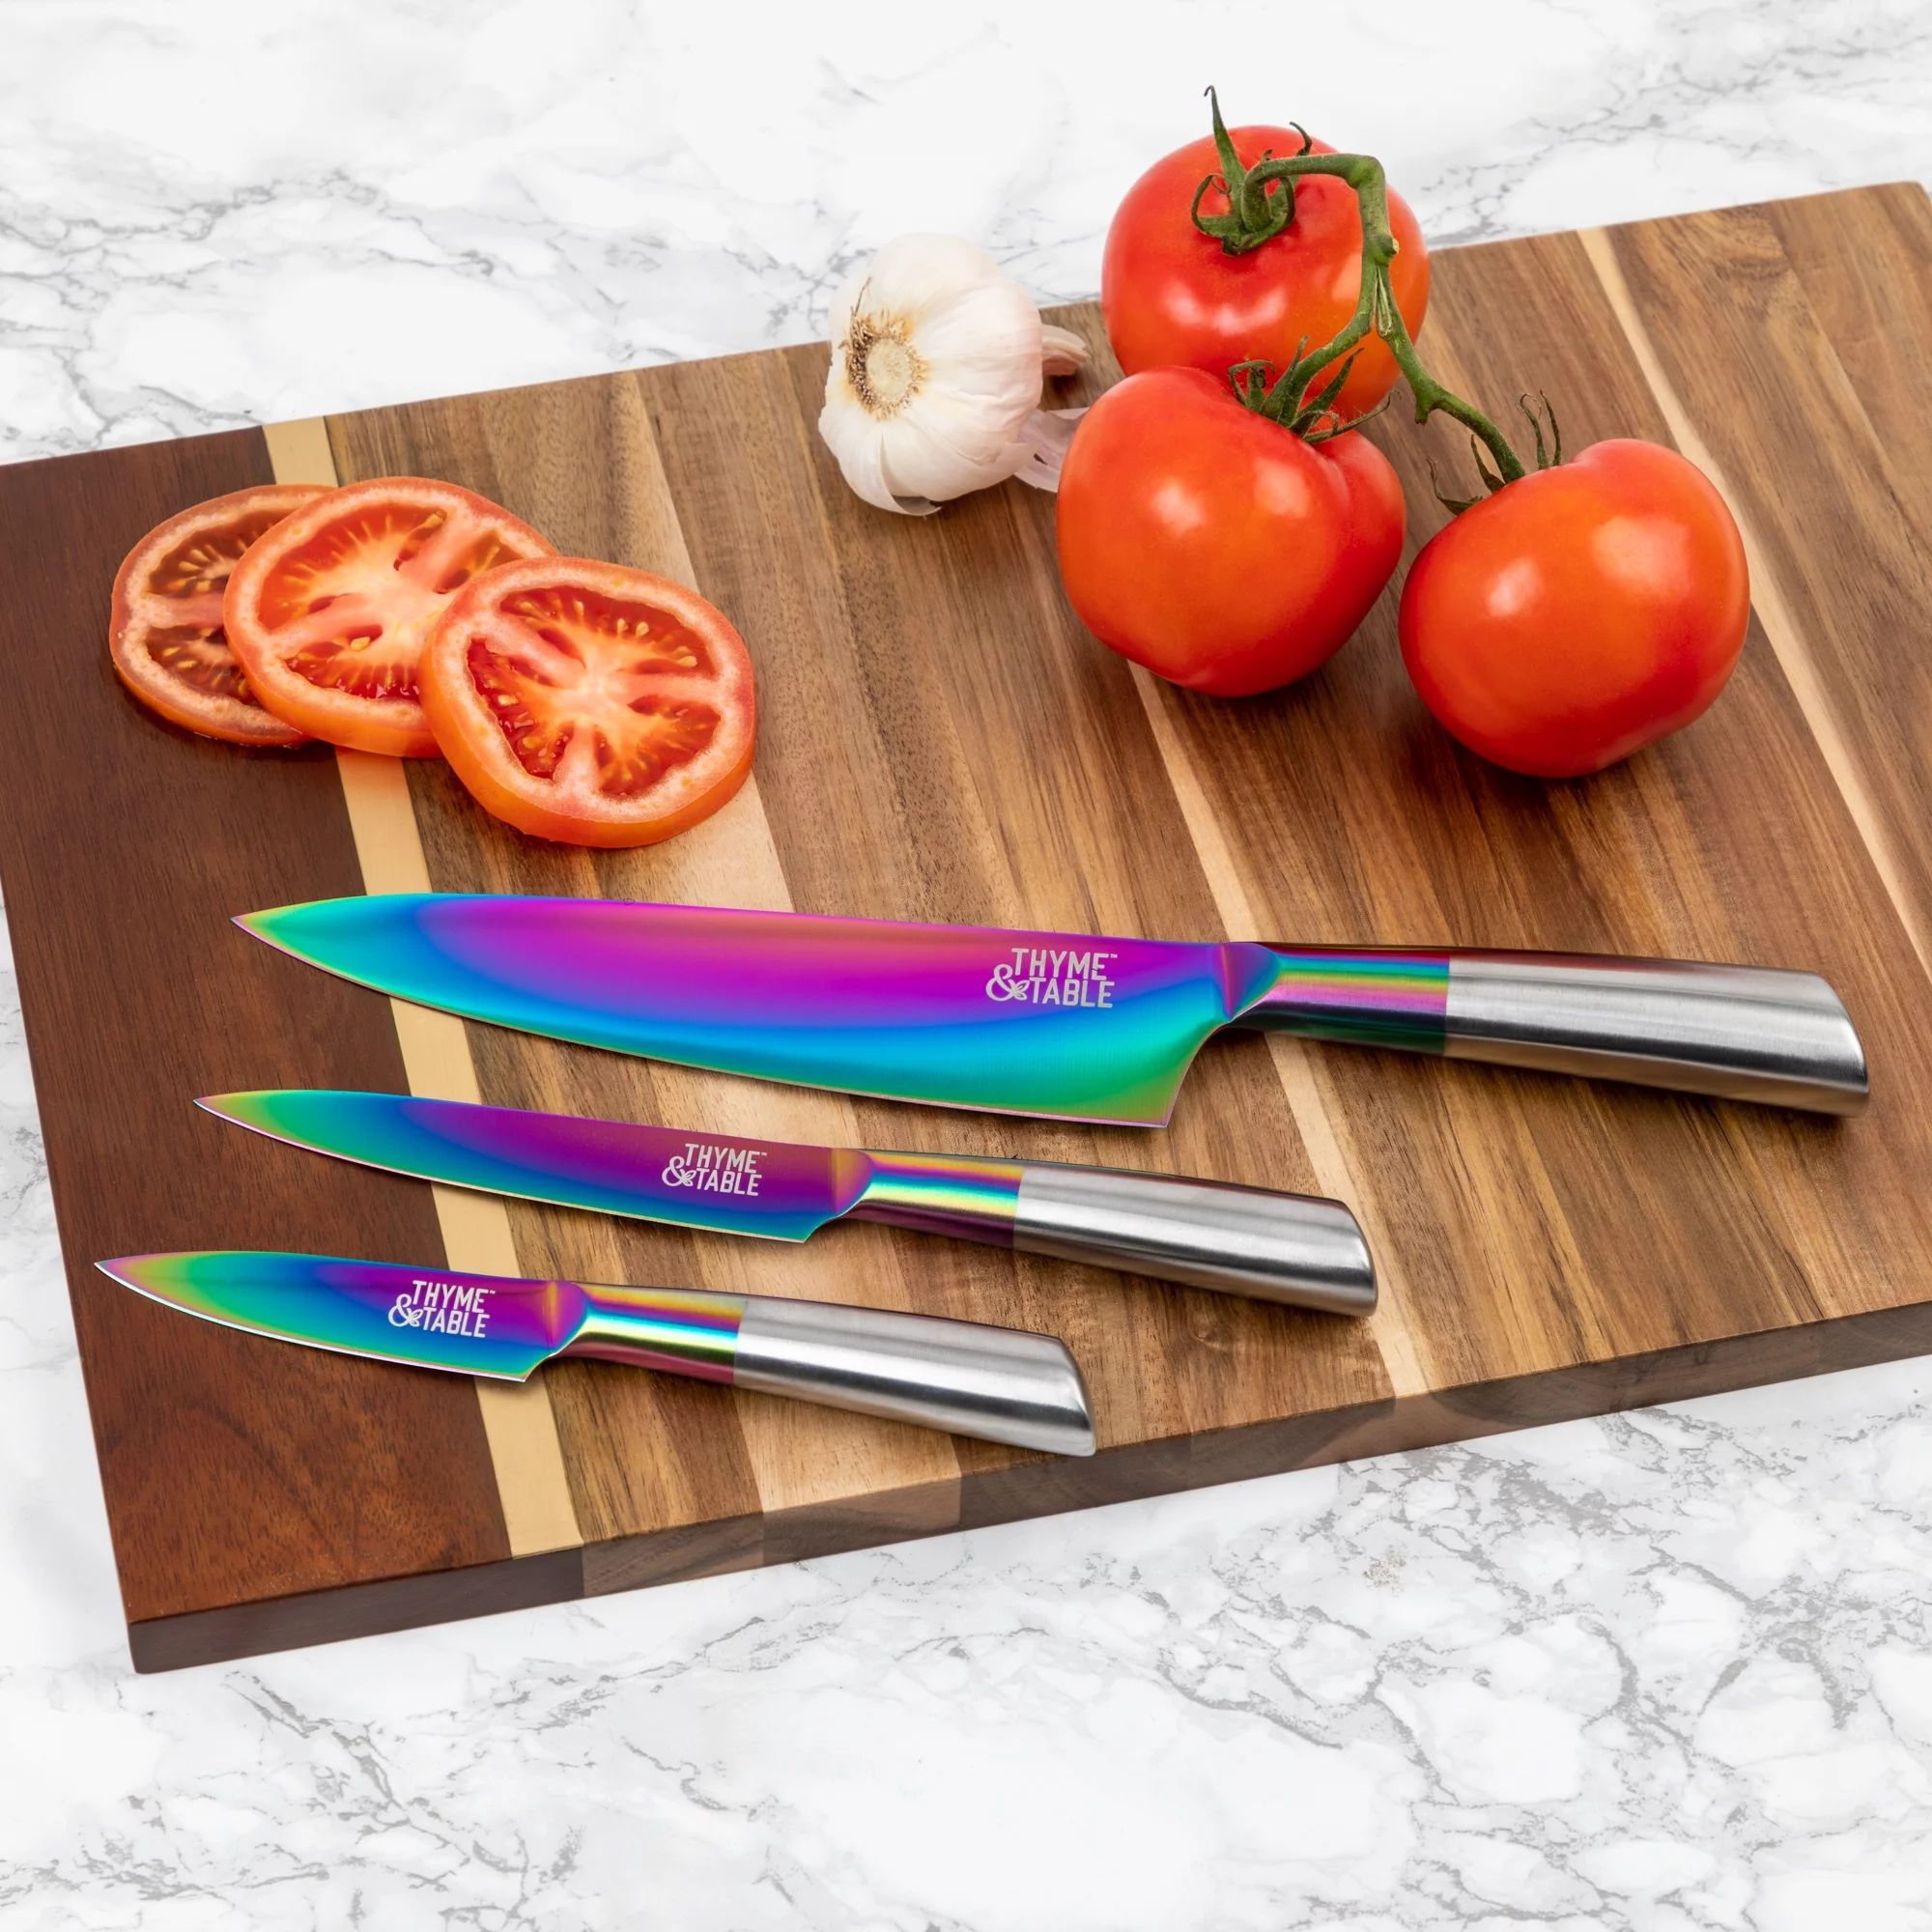 Thyme & Table Non-Stick Coated High Carbon Stainless Titanium Rainbow Knives, 3 Piece Set | Walmart (US)